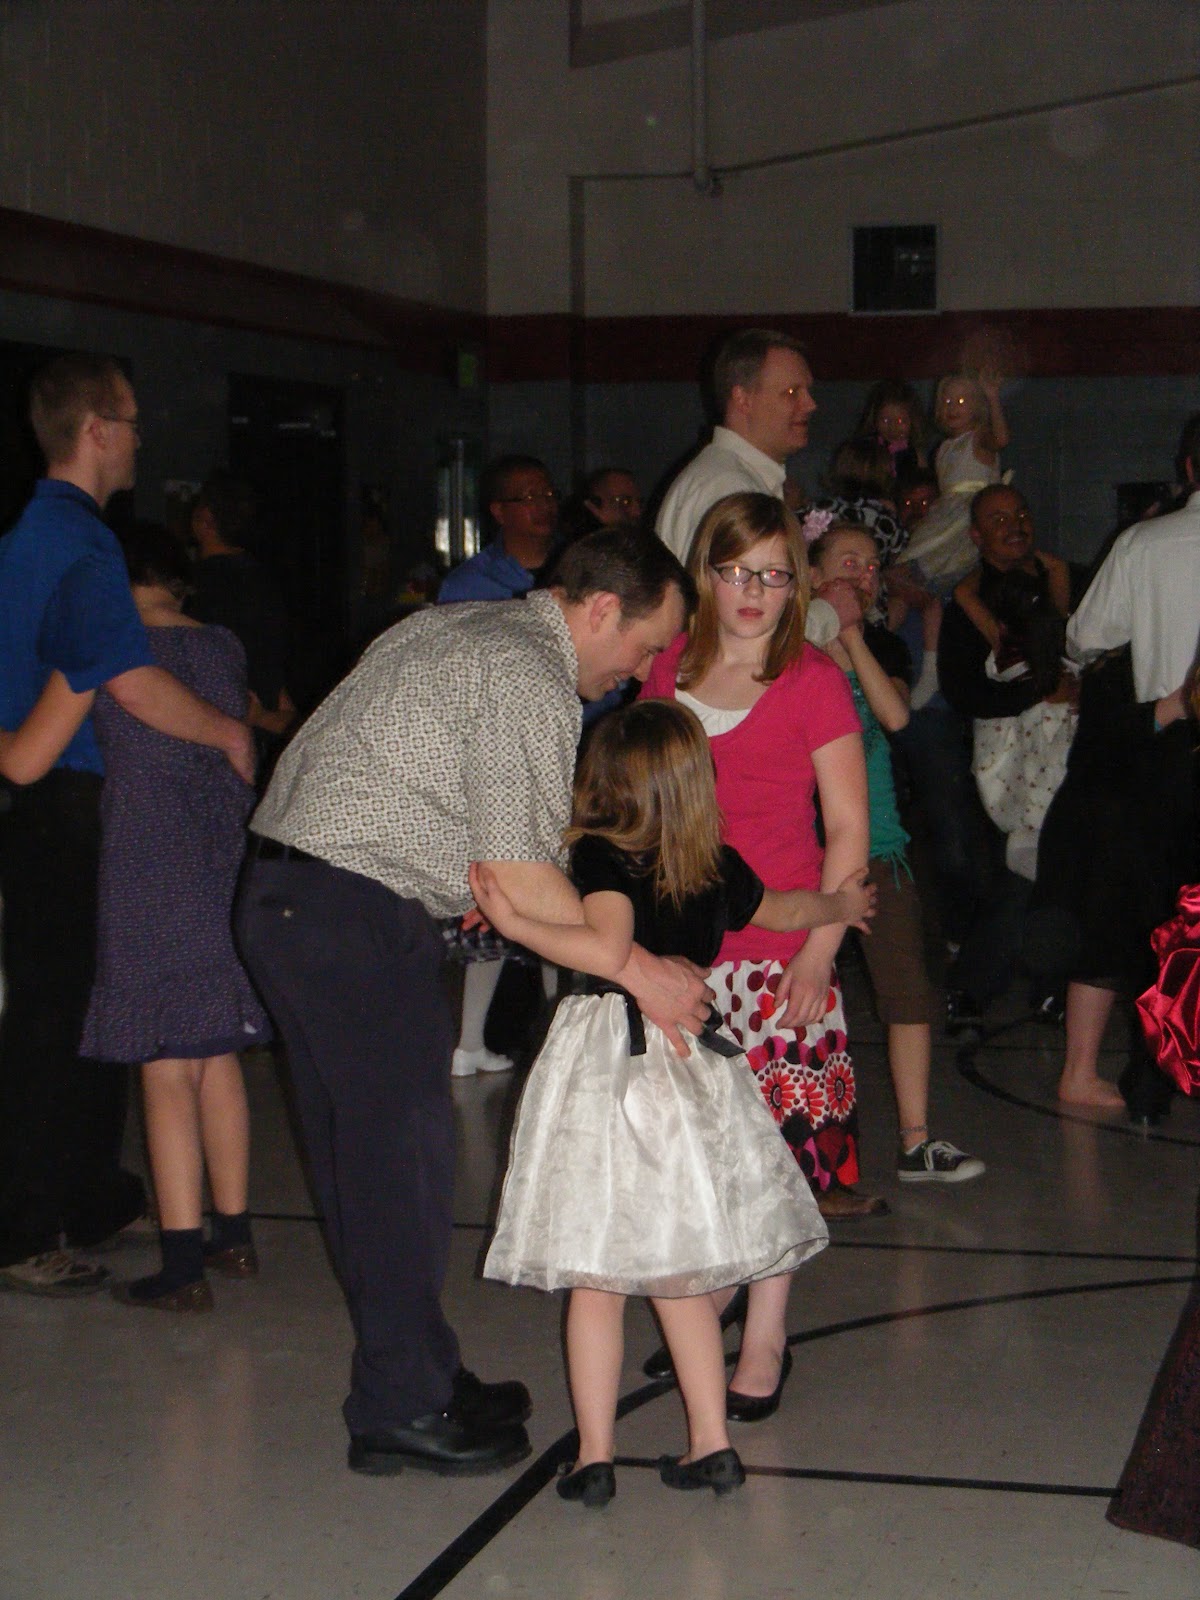 Friday Enrichment Daddy Daughter Dance What A Great Enrichment